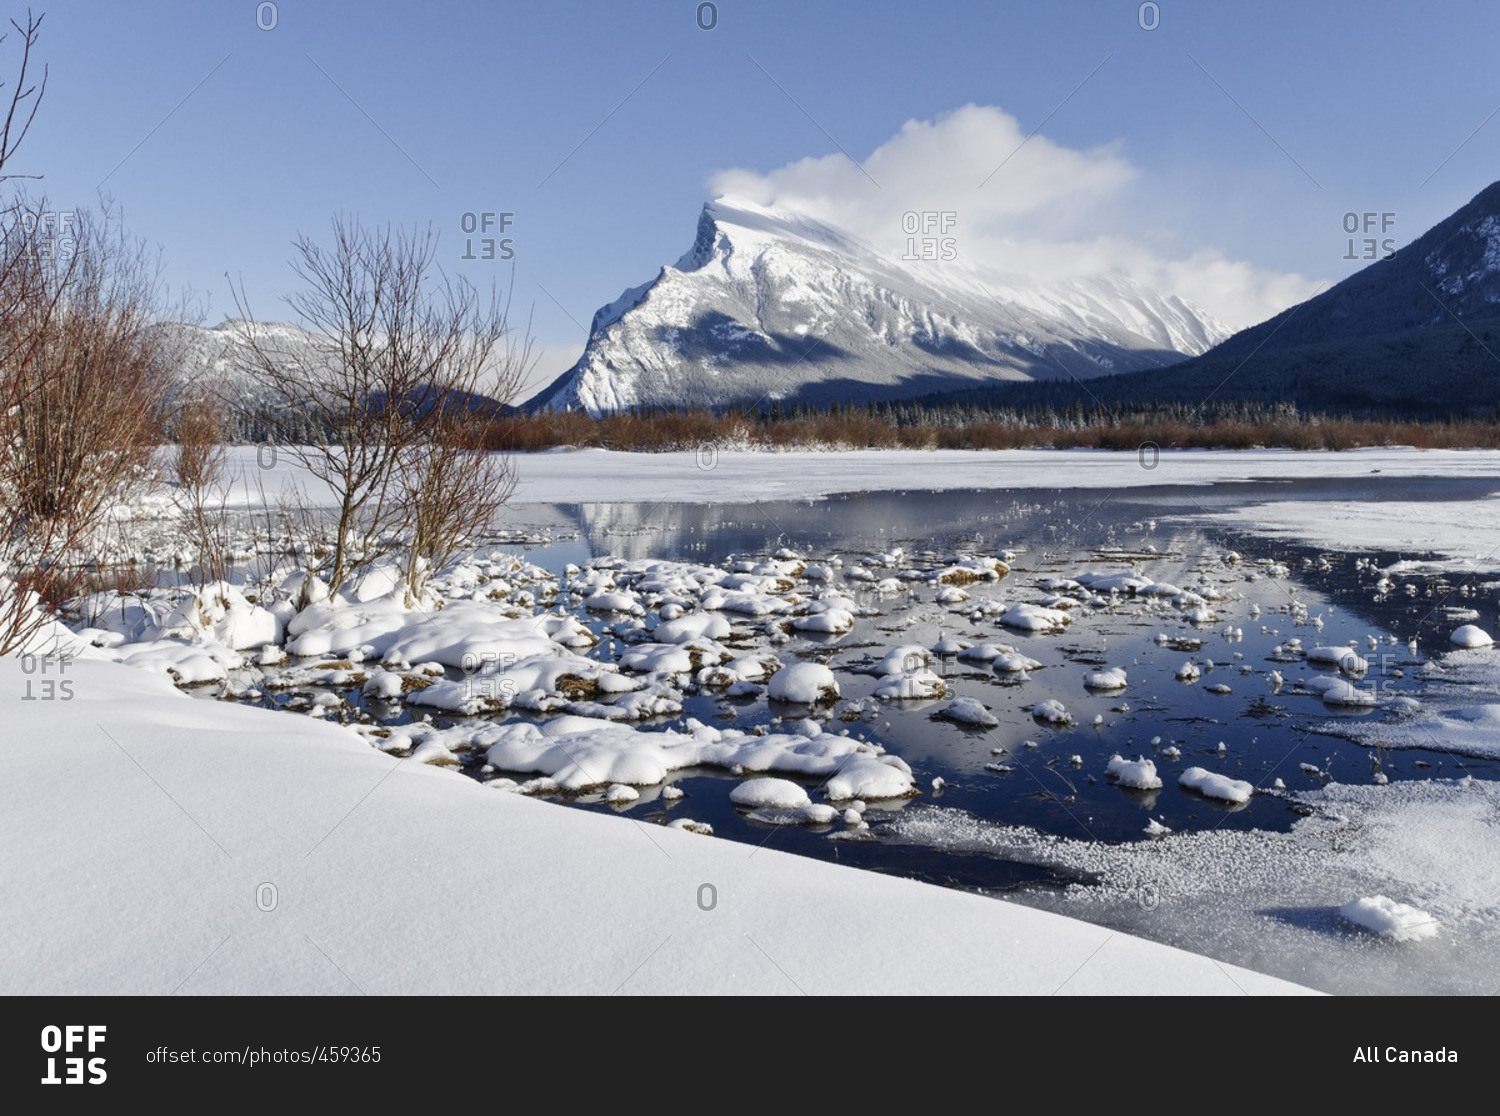 Mount Rundle from Vermilion Lakes.  Hot springs keep parts of Vermilion Lakes ice free even when it is -20 outside, Banff National Park, Alberta, Canada